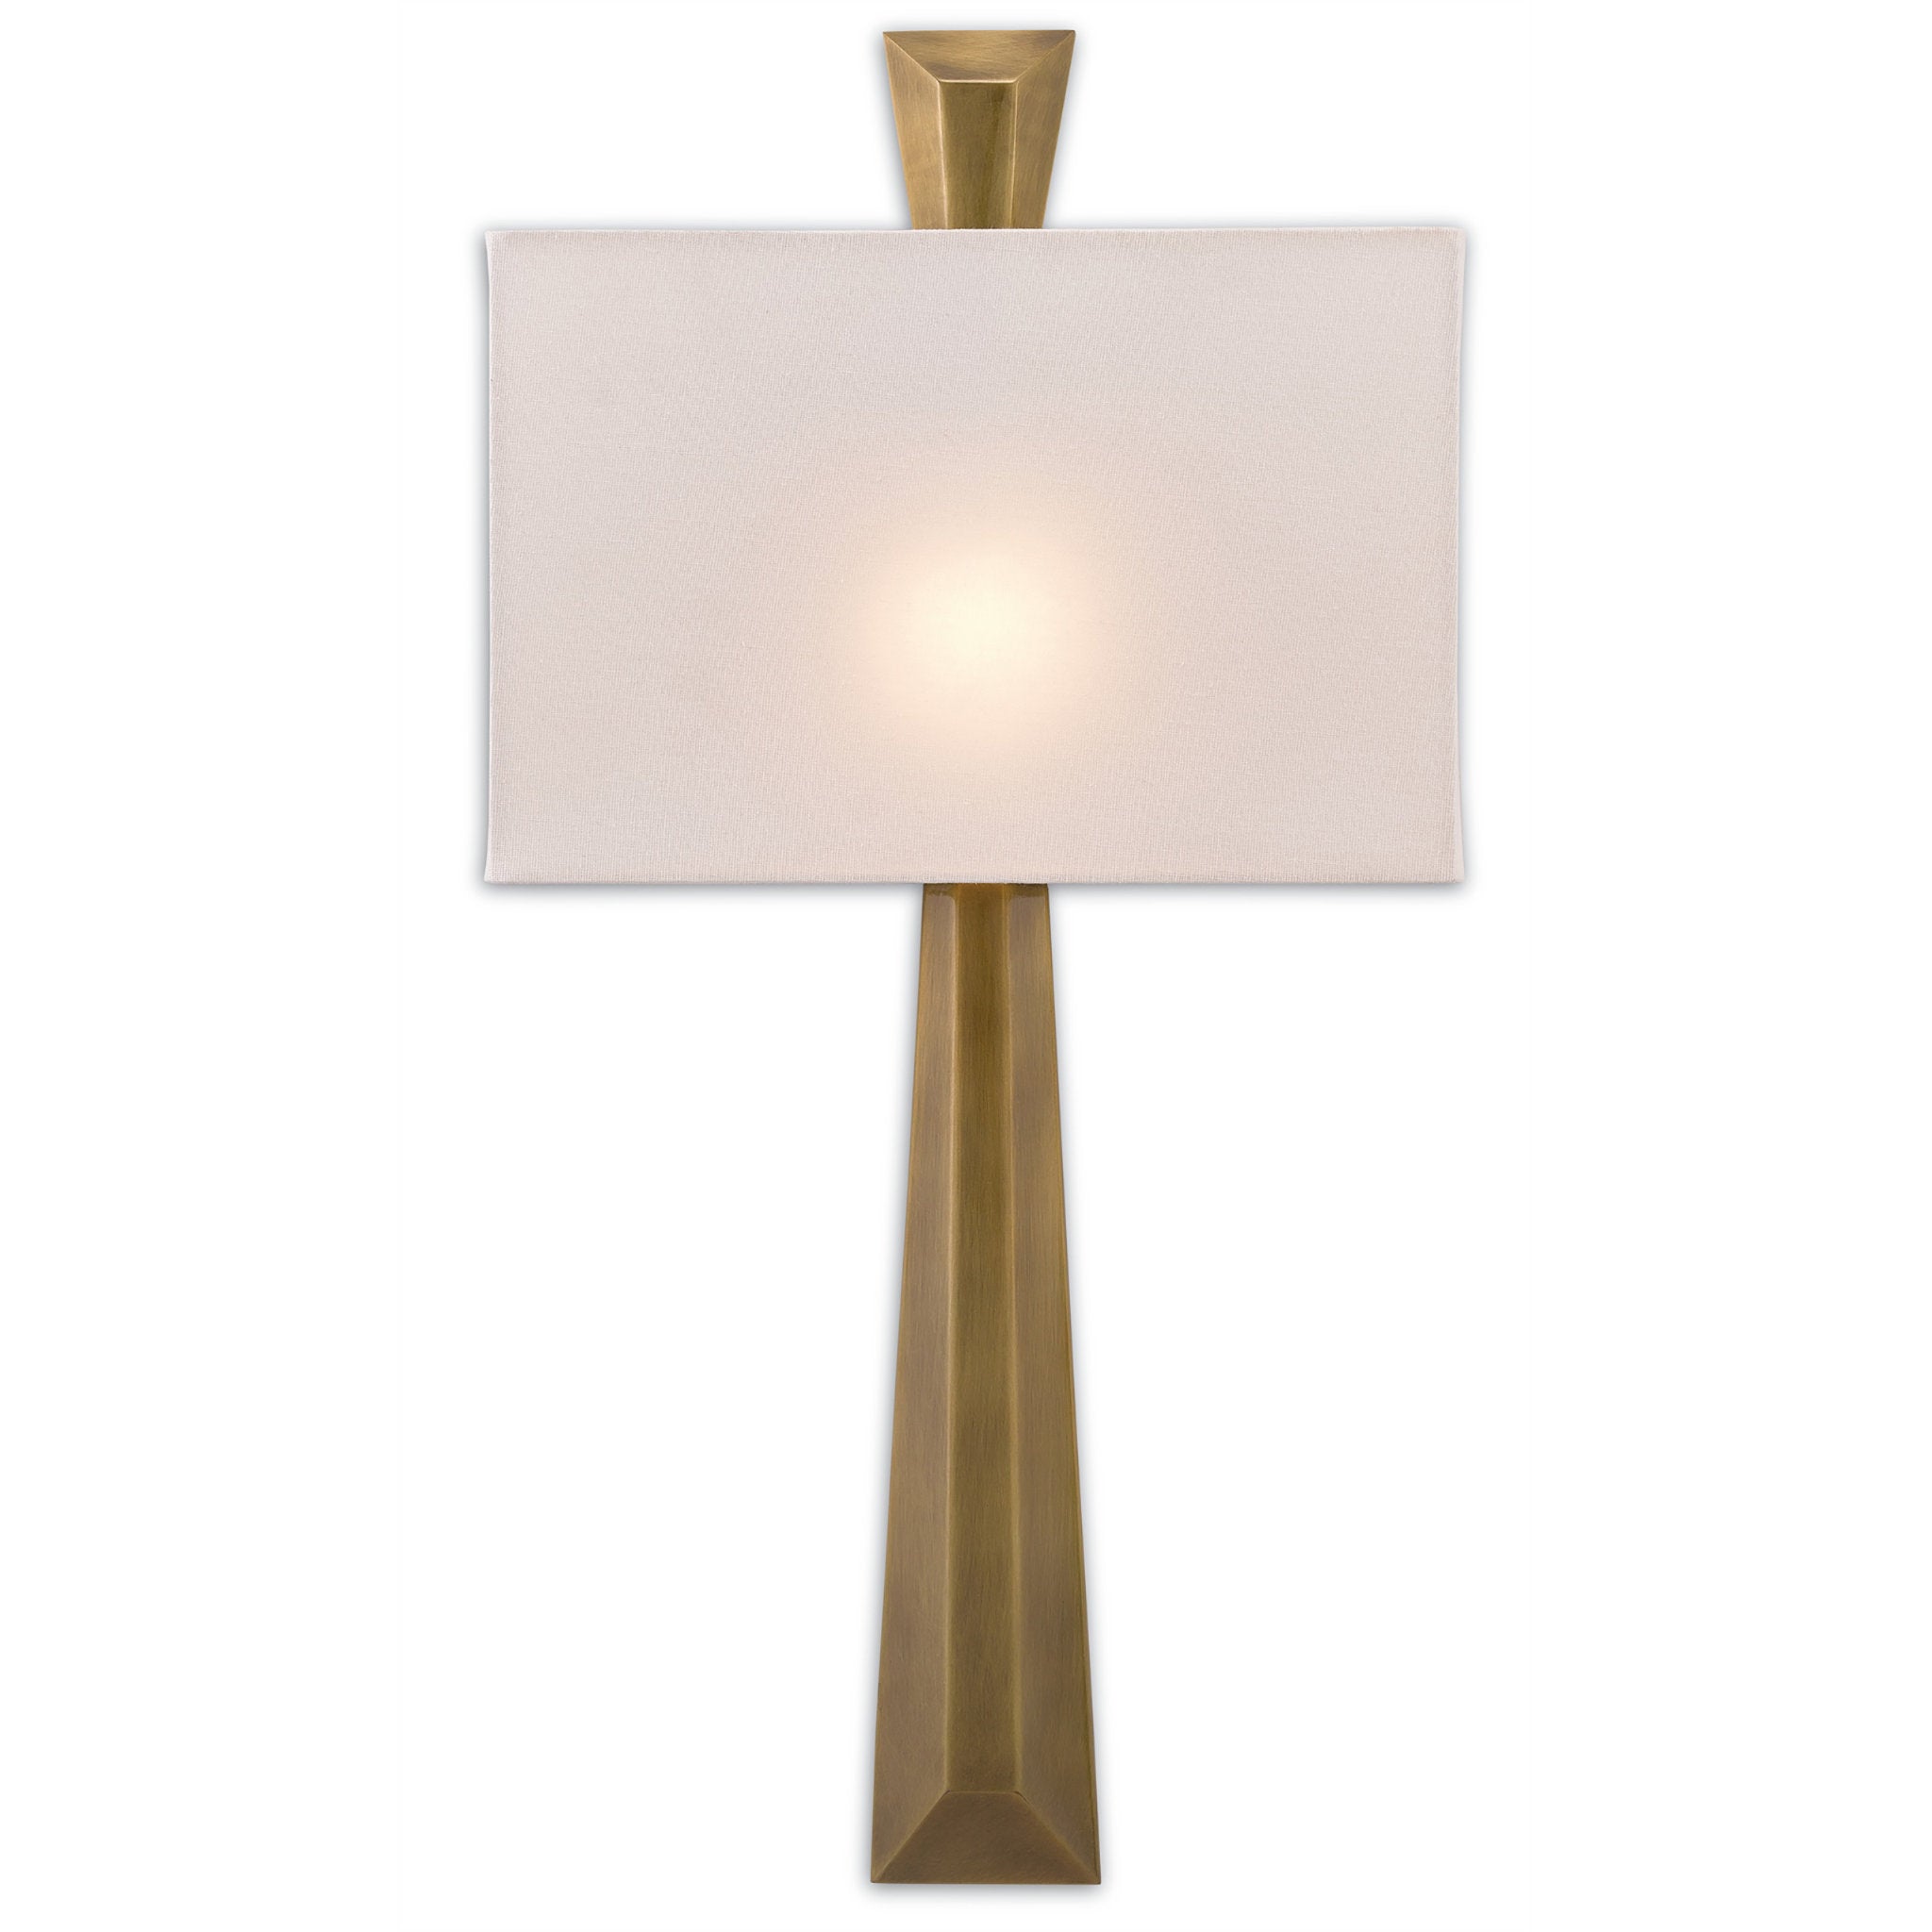 Arno Brass Wall Sconce, White Shade - Polished Antique Brass